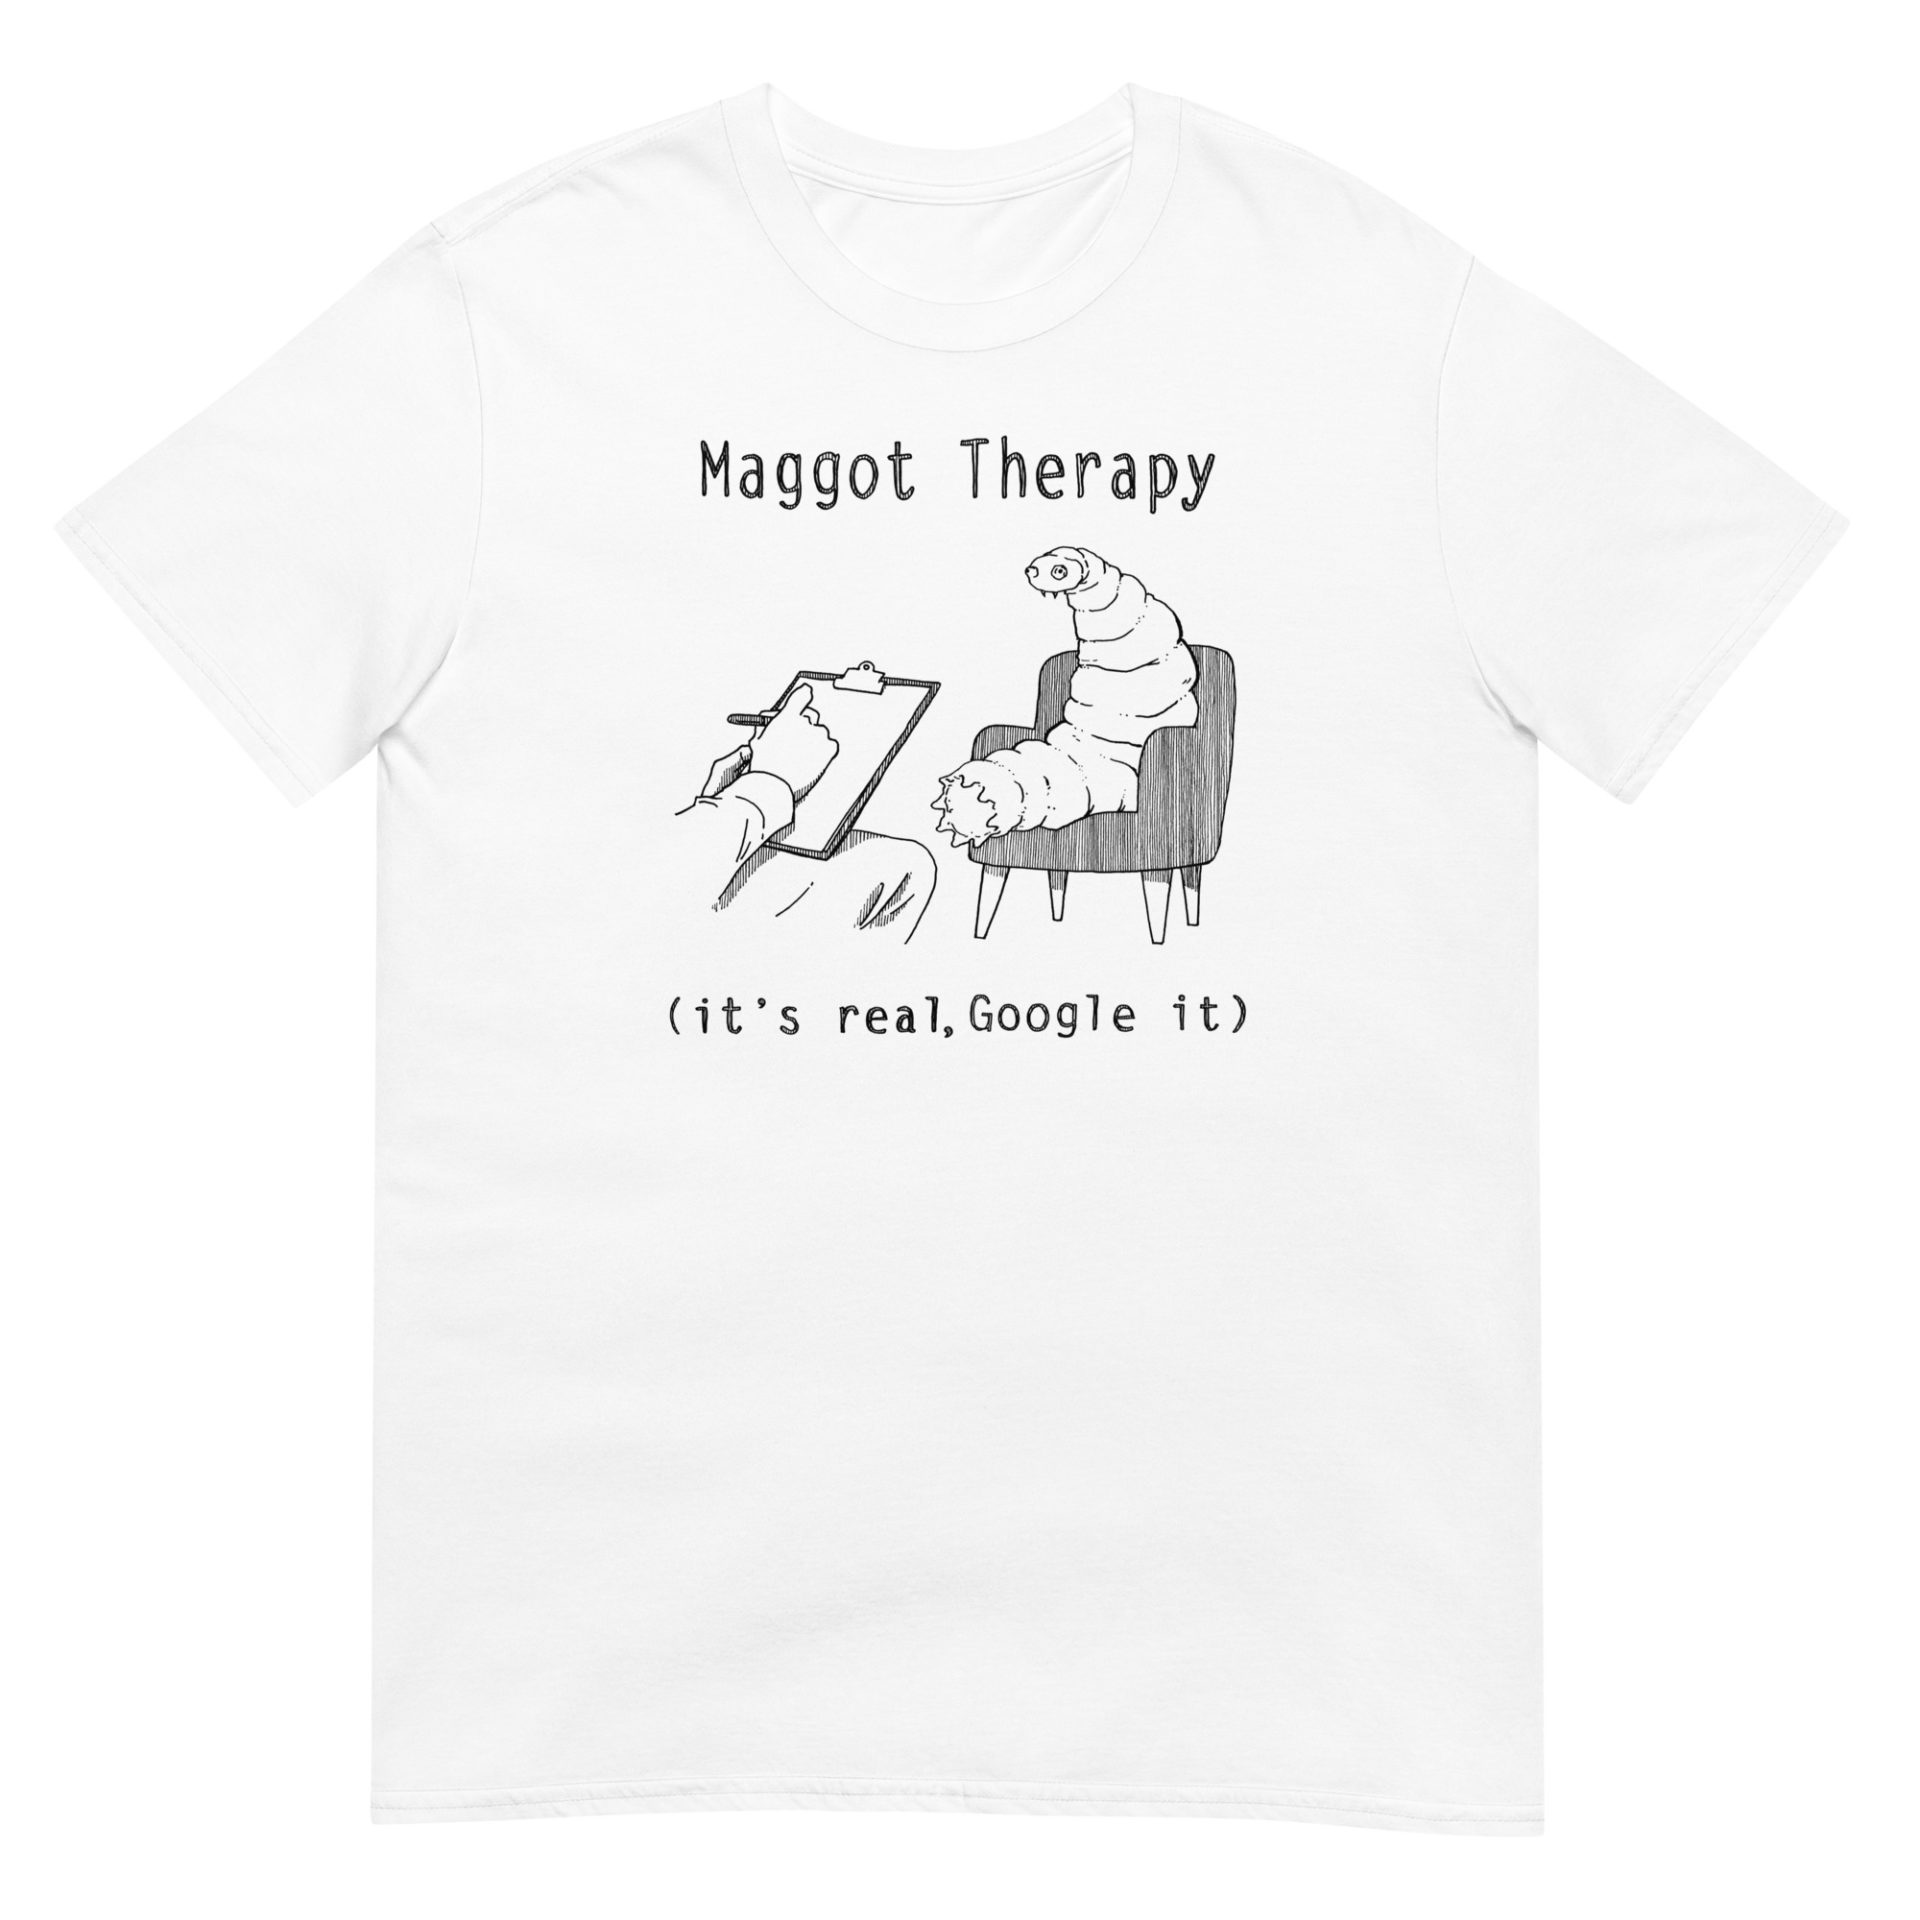 A white shirt with a drawing of a large maggot in a therapy session with the words Maggot Therapy (it's real, Google it). Designed by Kenny Velez.